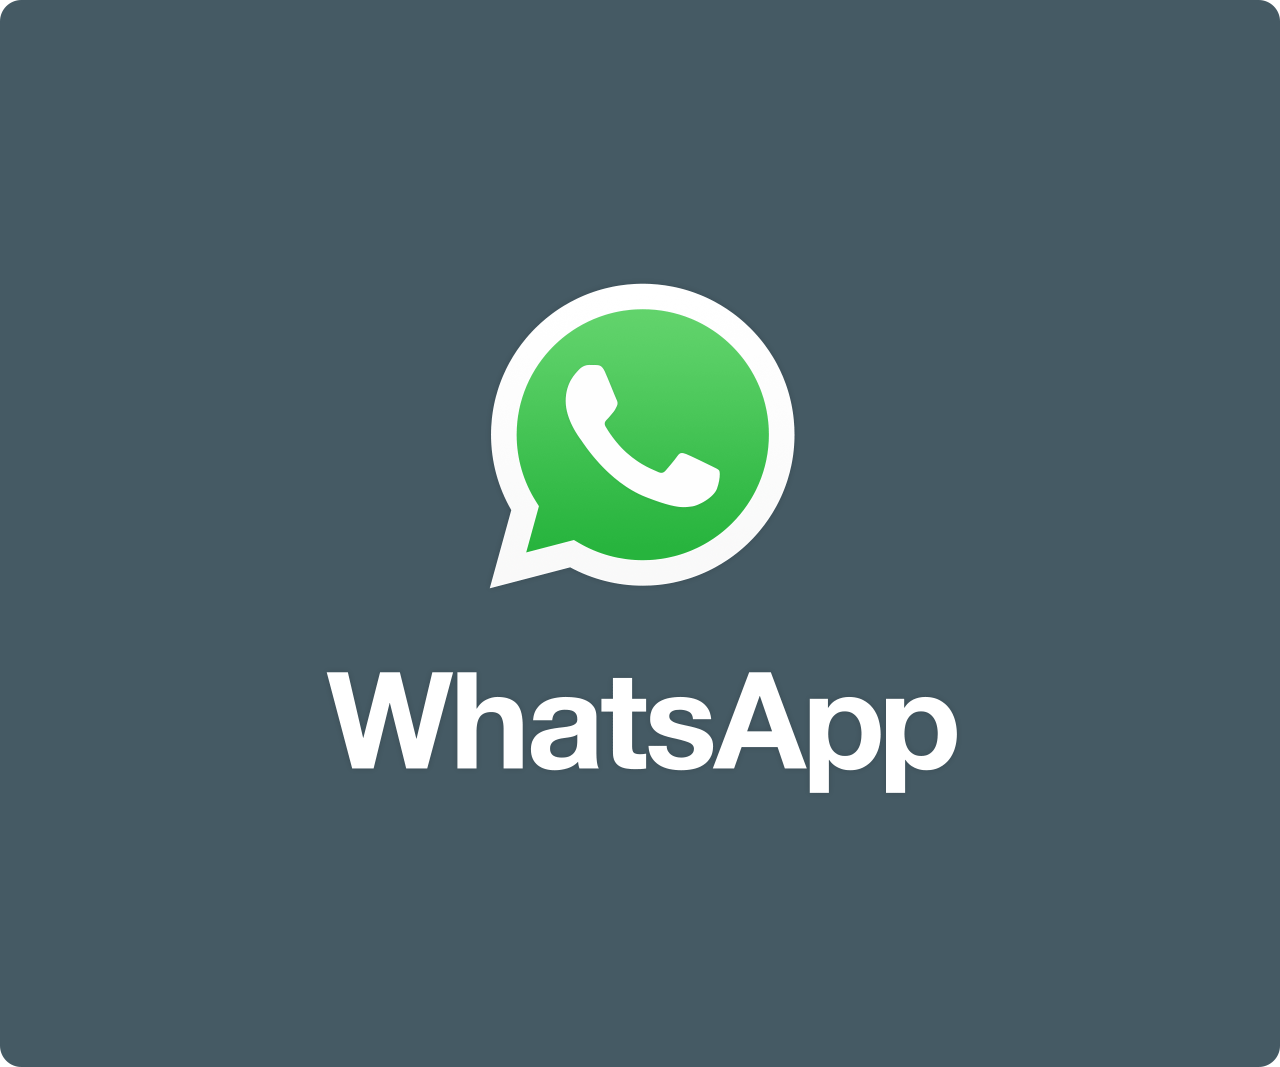 WhatsApp icon and wordmark on teal background